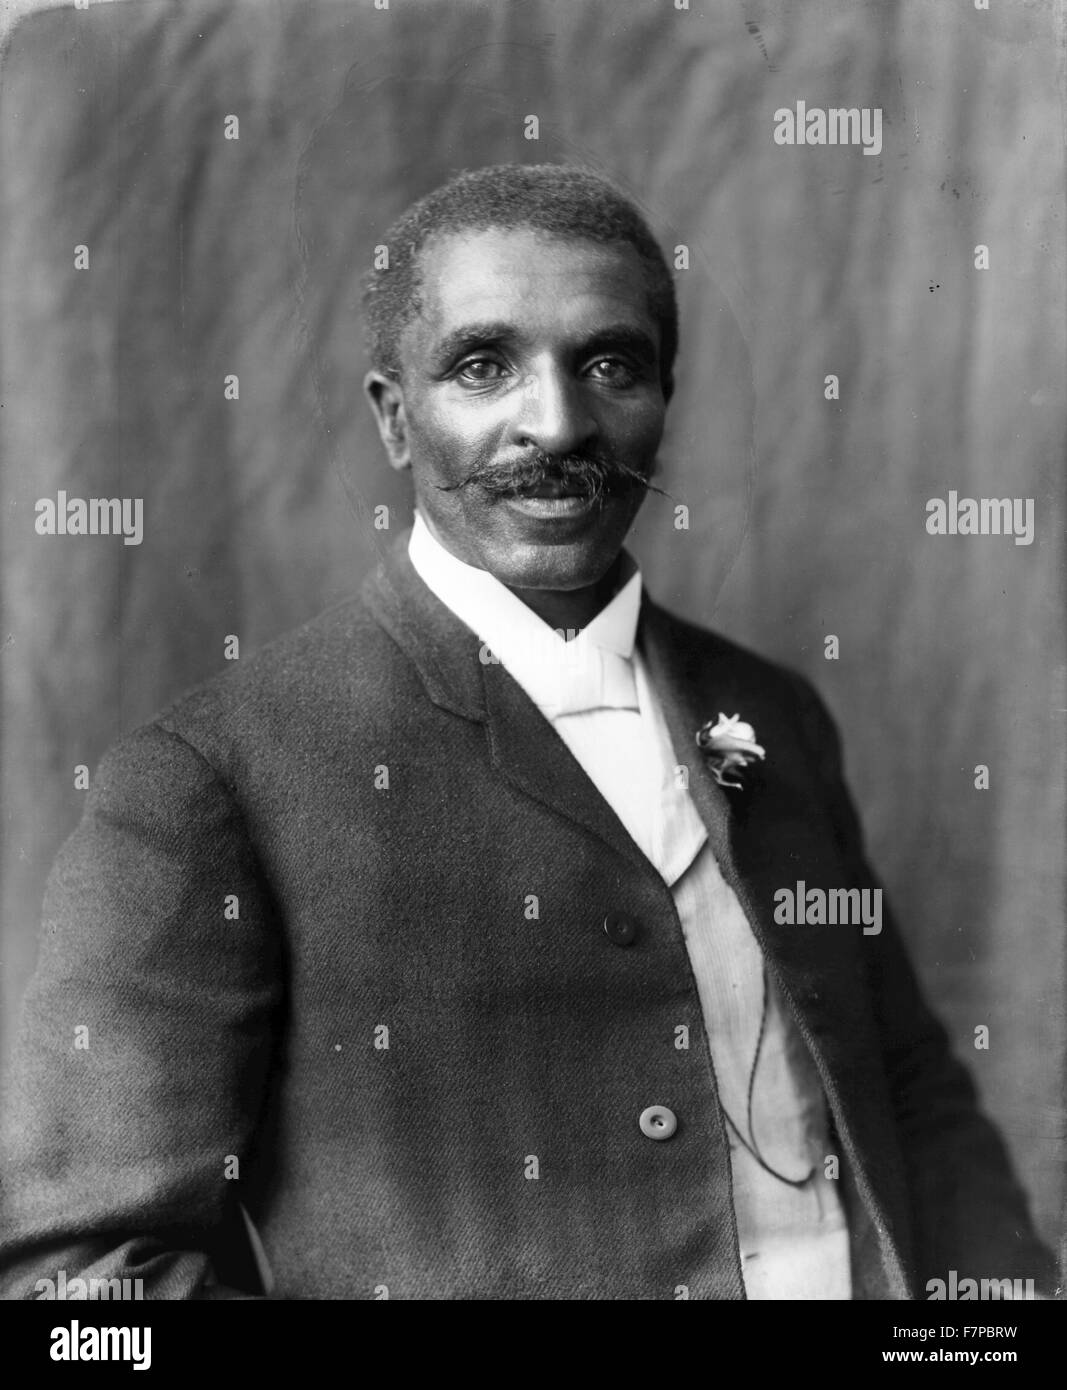 Photographic print of George Washington Carver (born into slavery in 1861or1864 - 1943), half-length portrait, facing right, Tuskegee Institute, Tuskegee, Alabama by Benjamin Frances Johnston, (1864-1952). Stock Photo